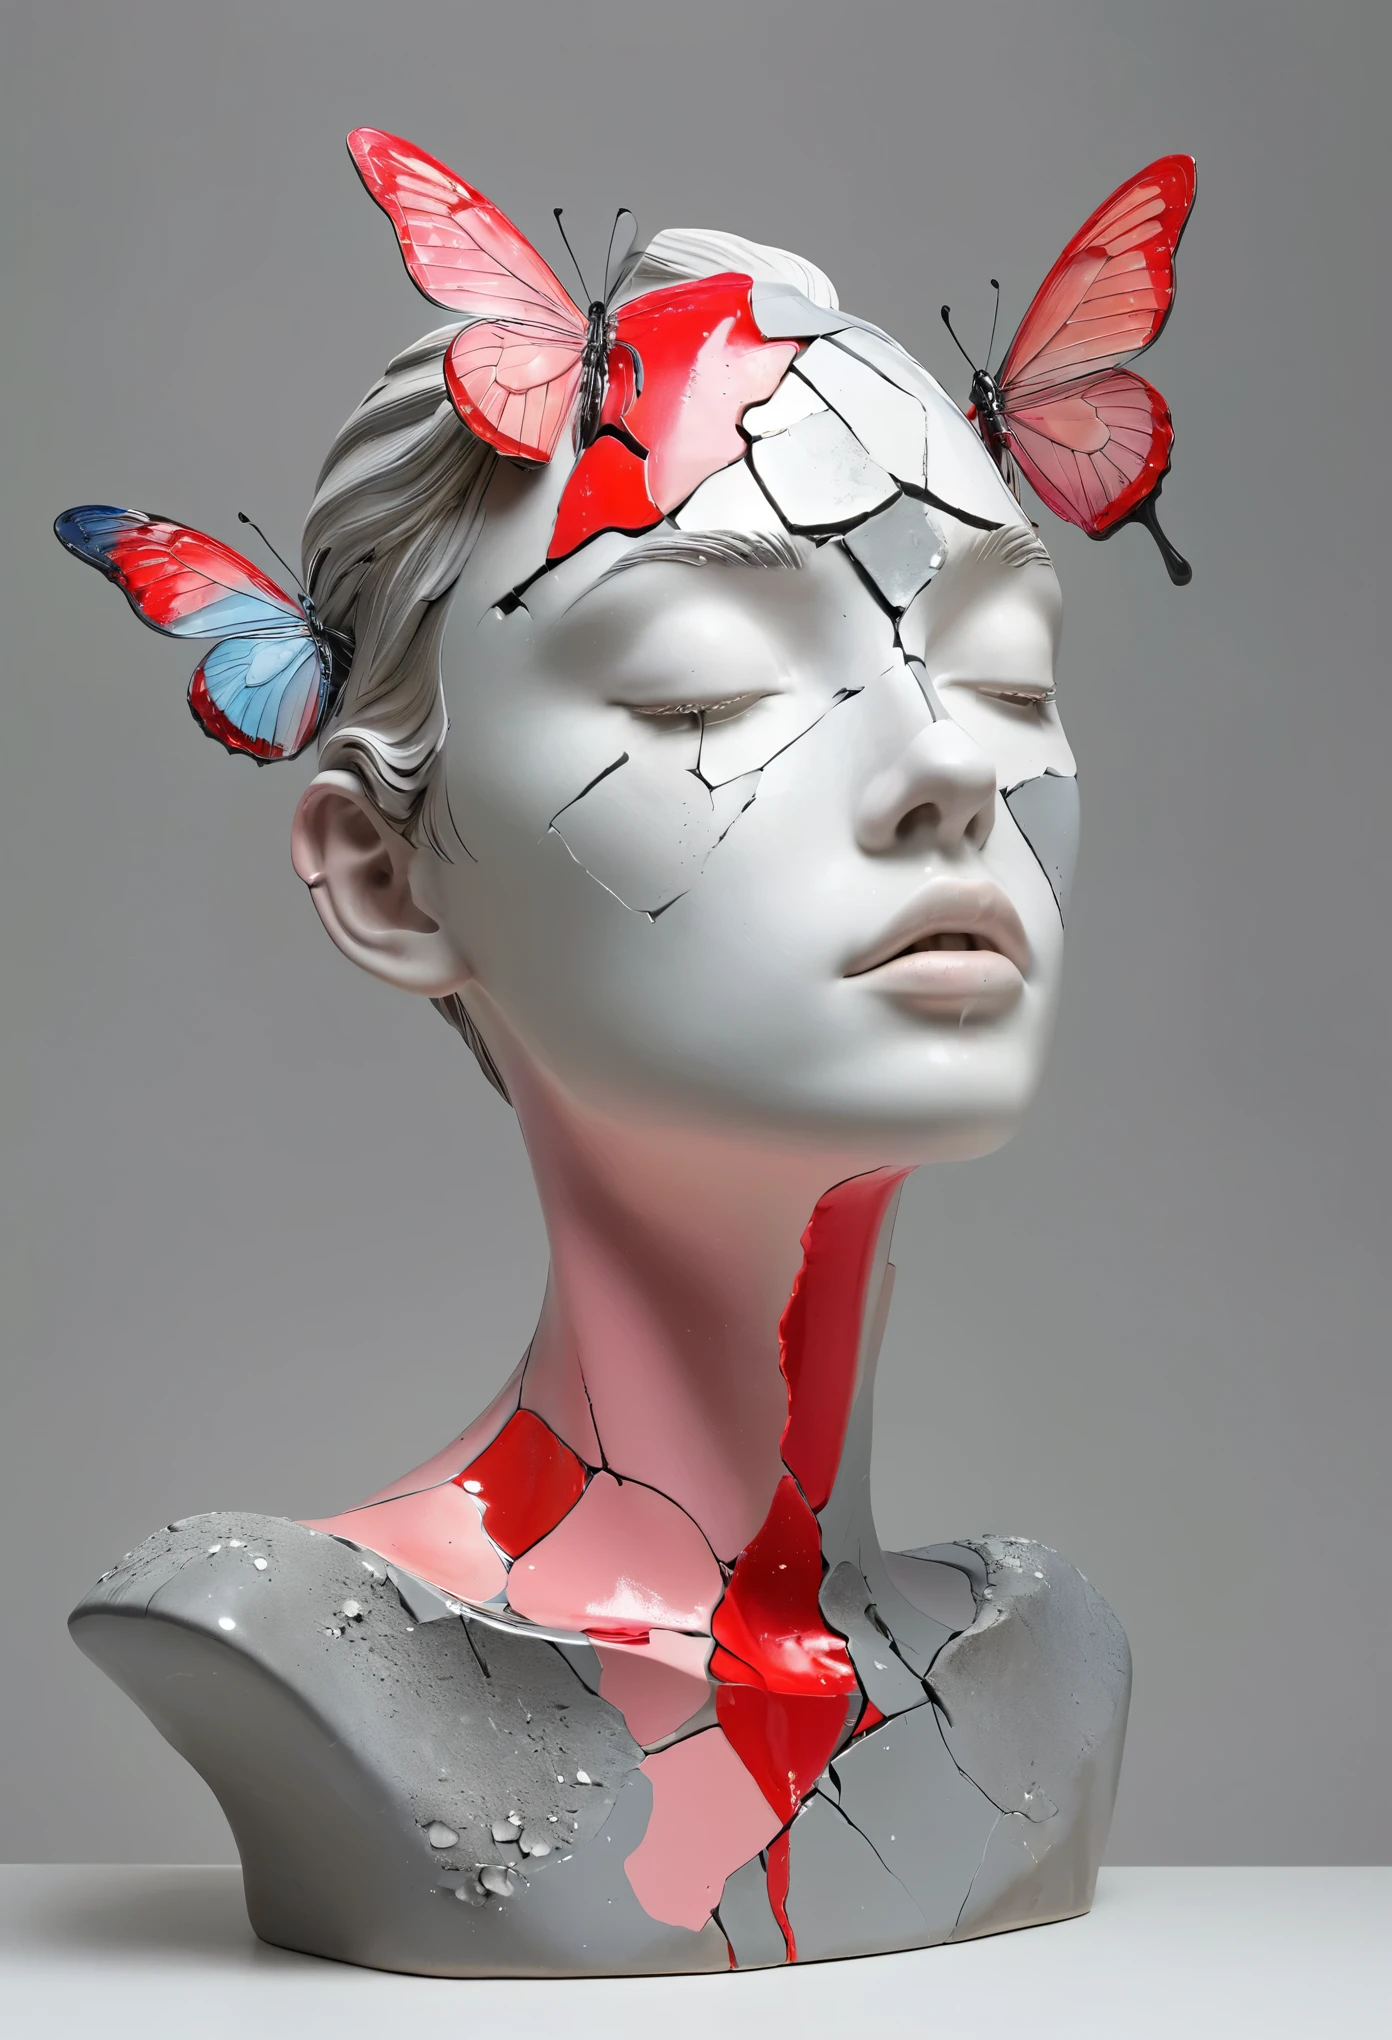 ((display，Still life table，Artistic statues，3D Sculpture，ceramics，Surface cracks，Shattered Texture)), The skin is painted in soft colors. Shades include soft pink, bluth, , and red, Create a fusion，Showing the beauty of nature. This artwork is presented on a grey background，To emphasize its artistic quality.
